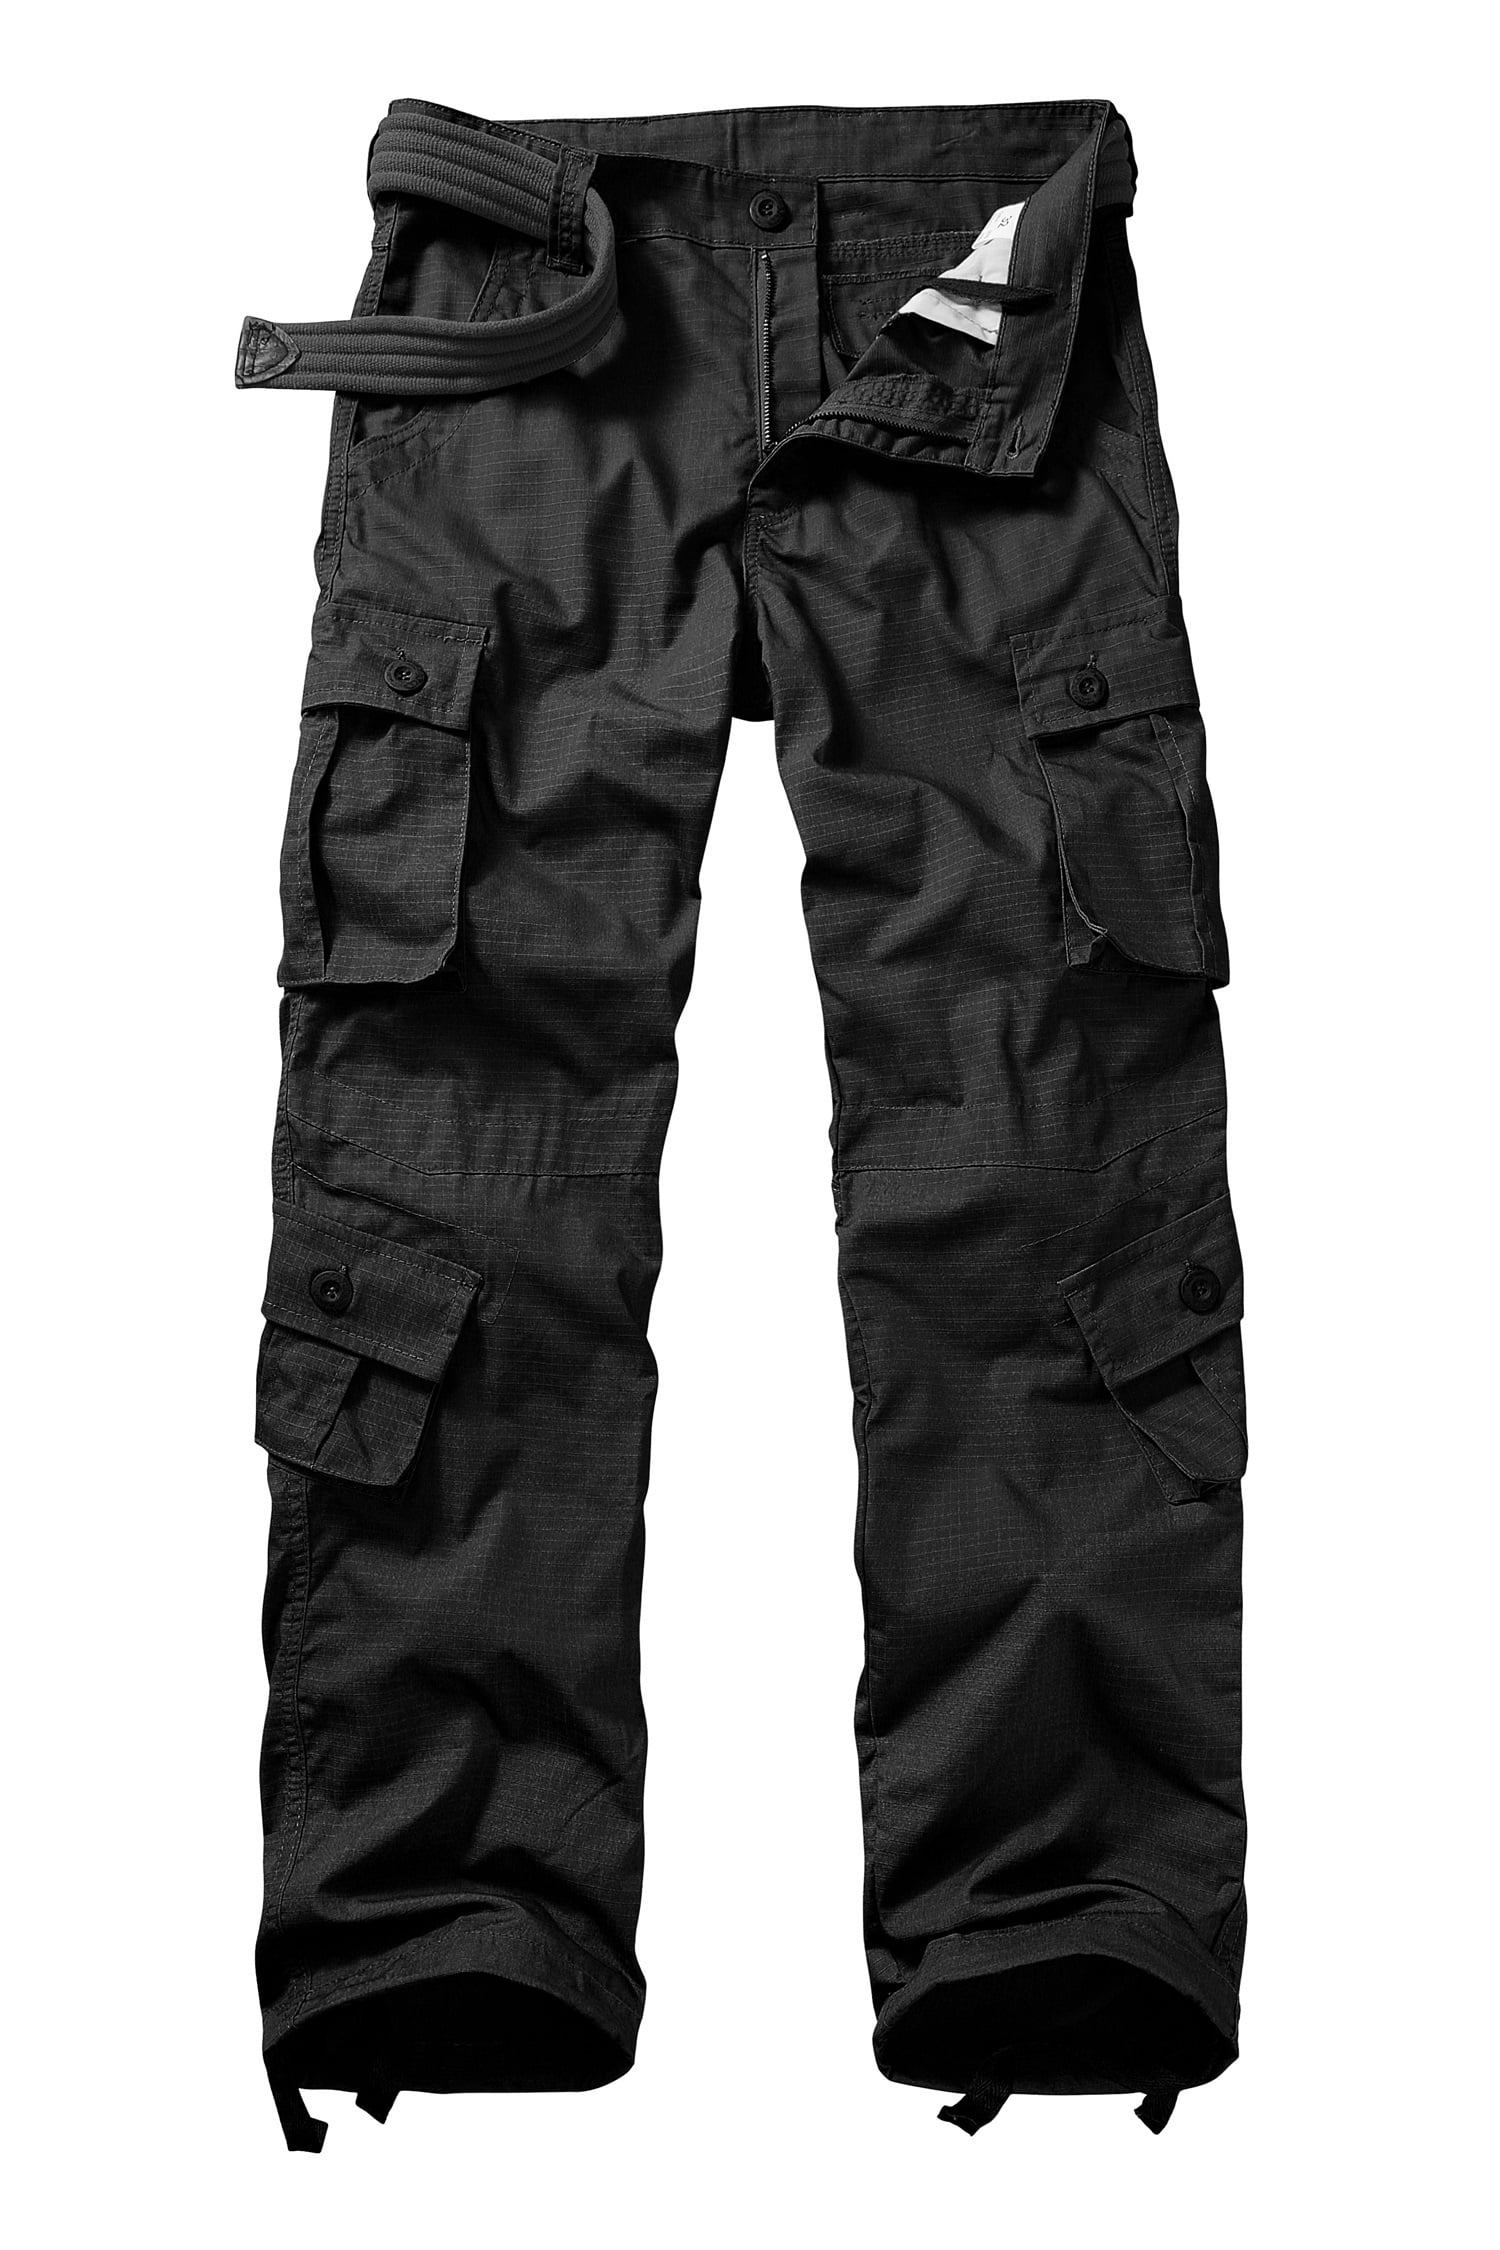 TRGPSG Men's Casual Work Cargo Pants with 8 Pockets Outdoor Hiking ...